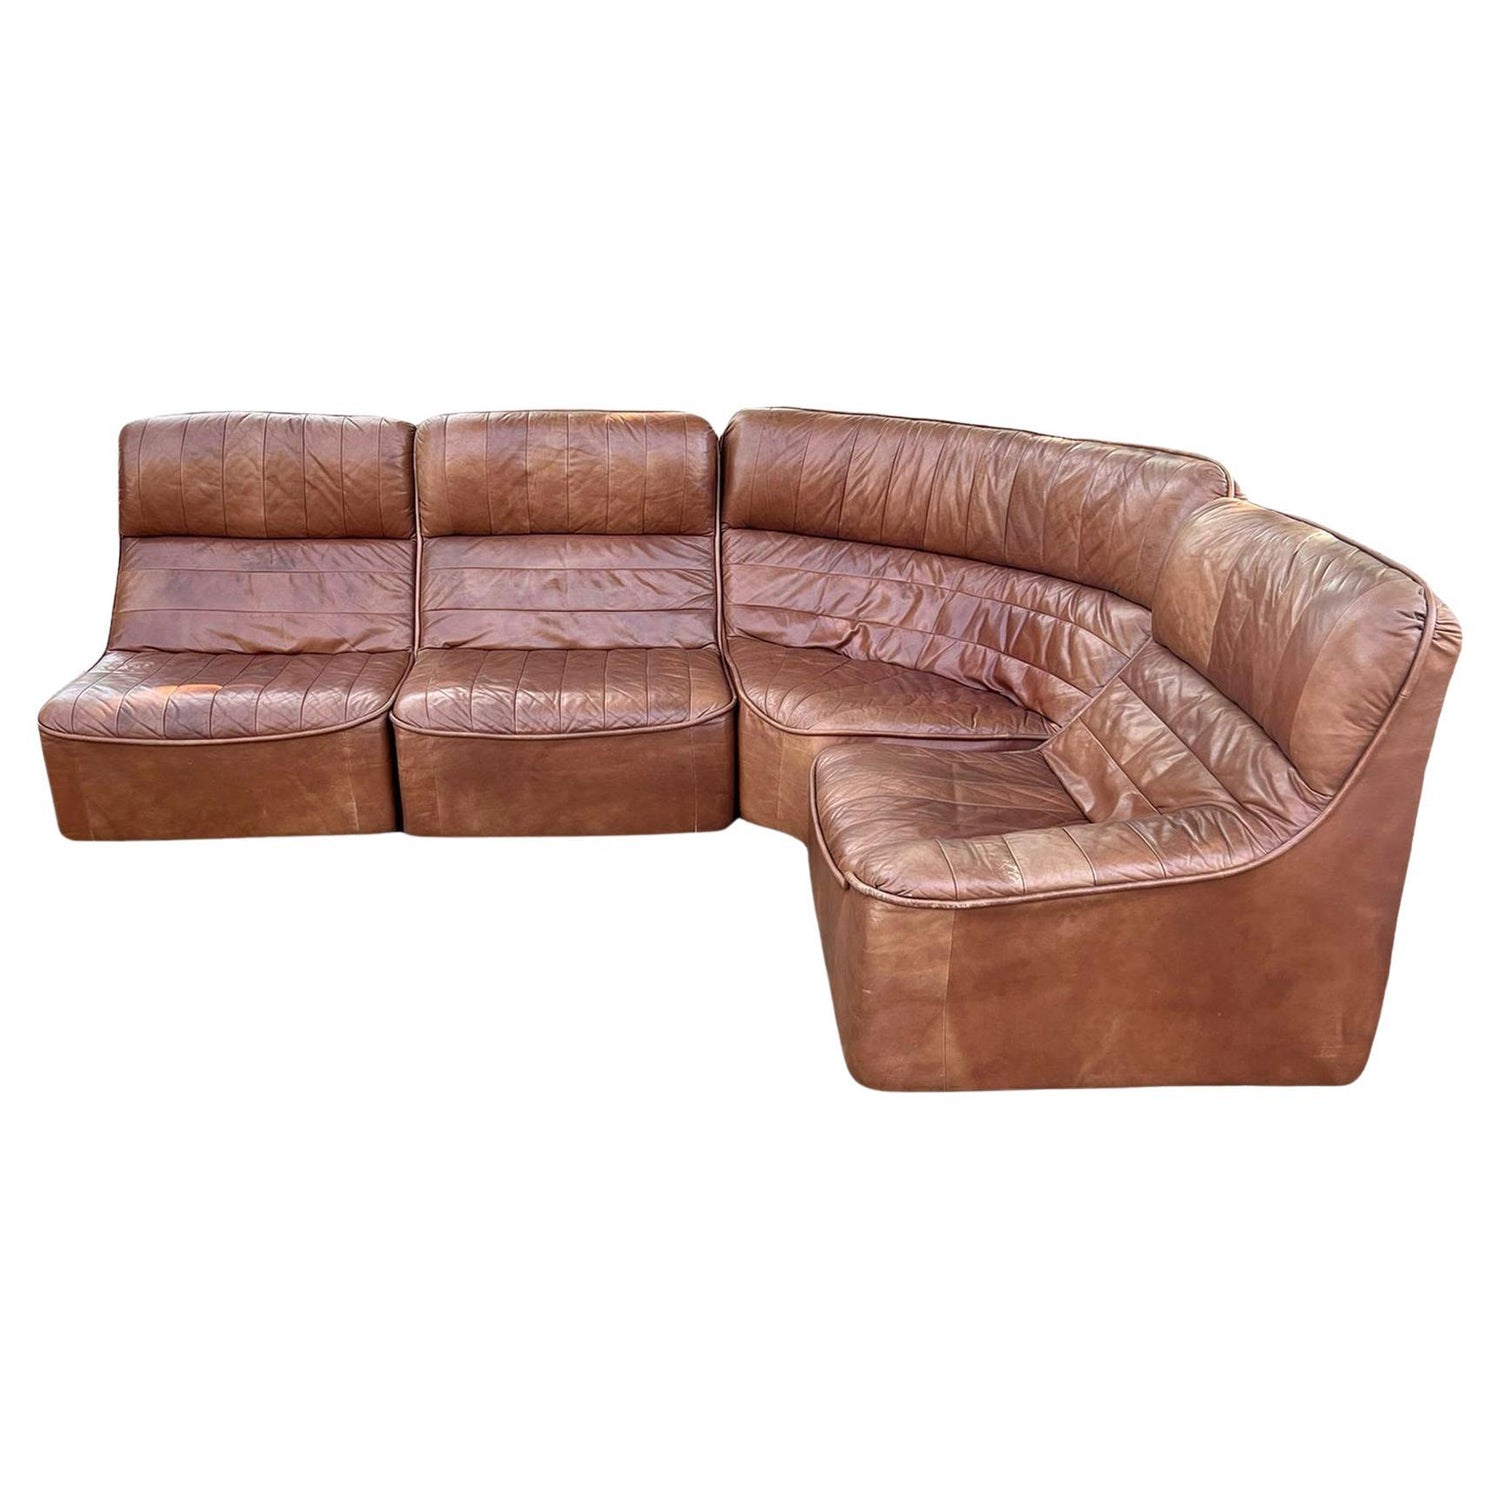 1970s Leather Sofa Bighinello Sale Lounge for For George by Cognac Italy, Eurosalotto, in at 1stDibs